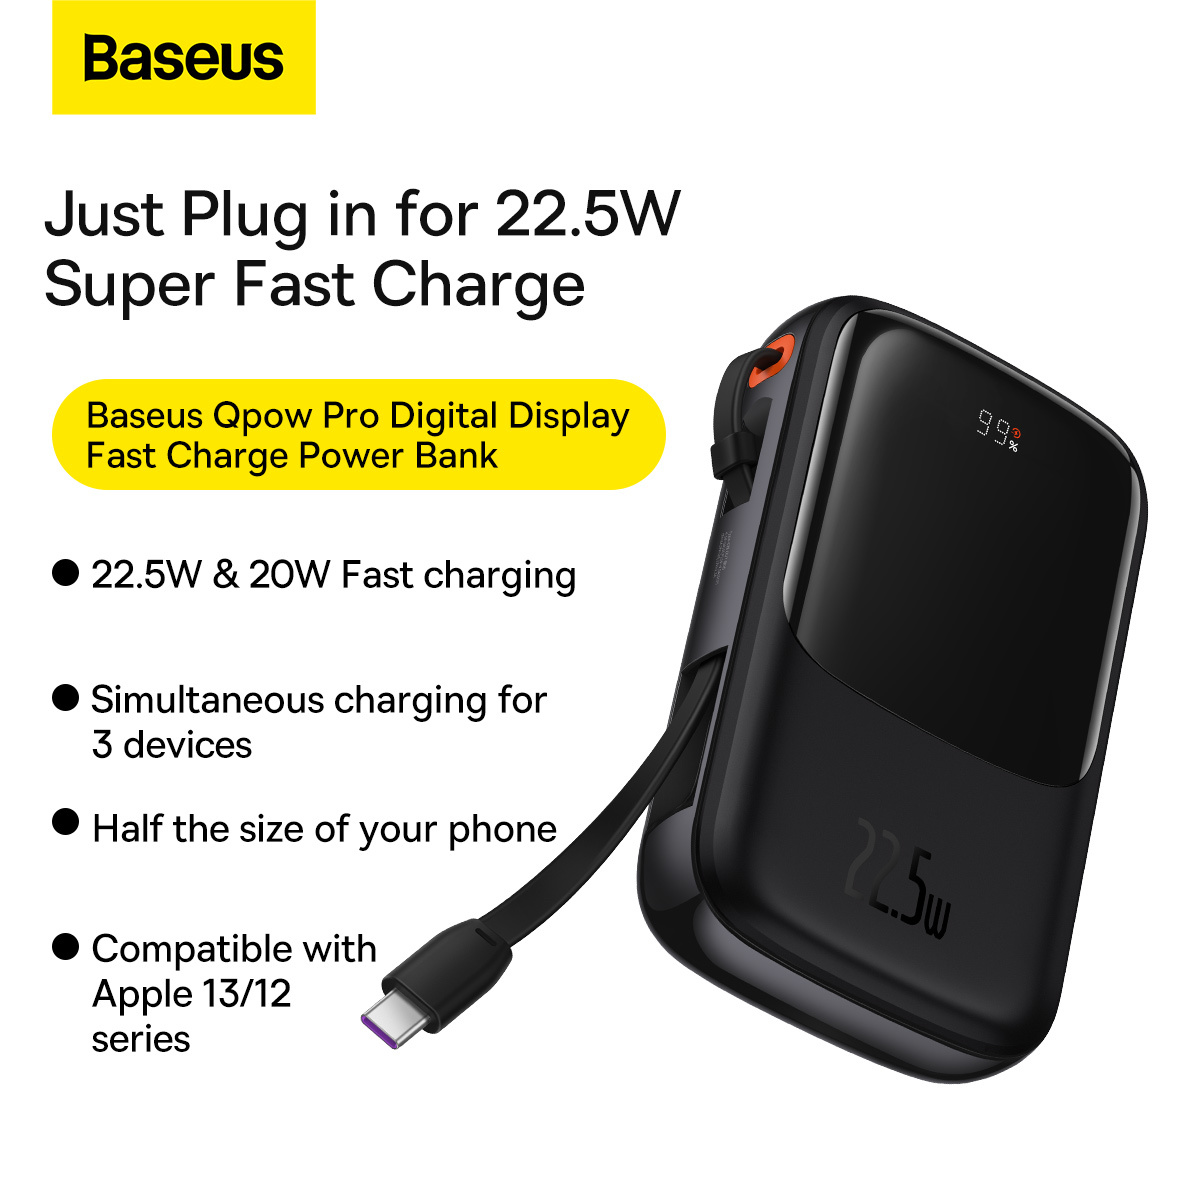 Basics 10000mAh 22.5W Lithium-Polymer Power Bank | Dual Input,  Triple Output | Fast Charging, Black, Type-C Cable Included